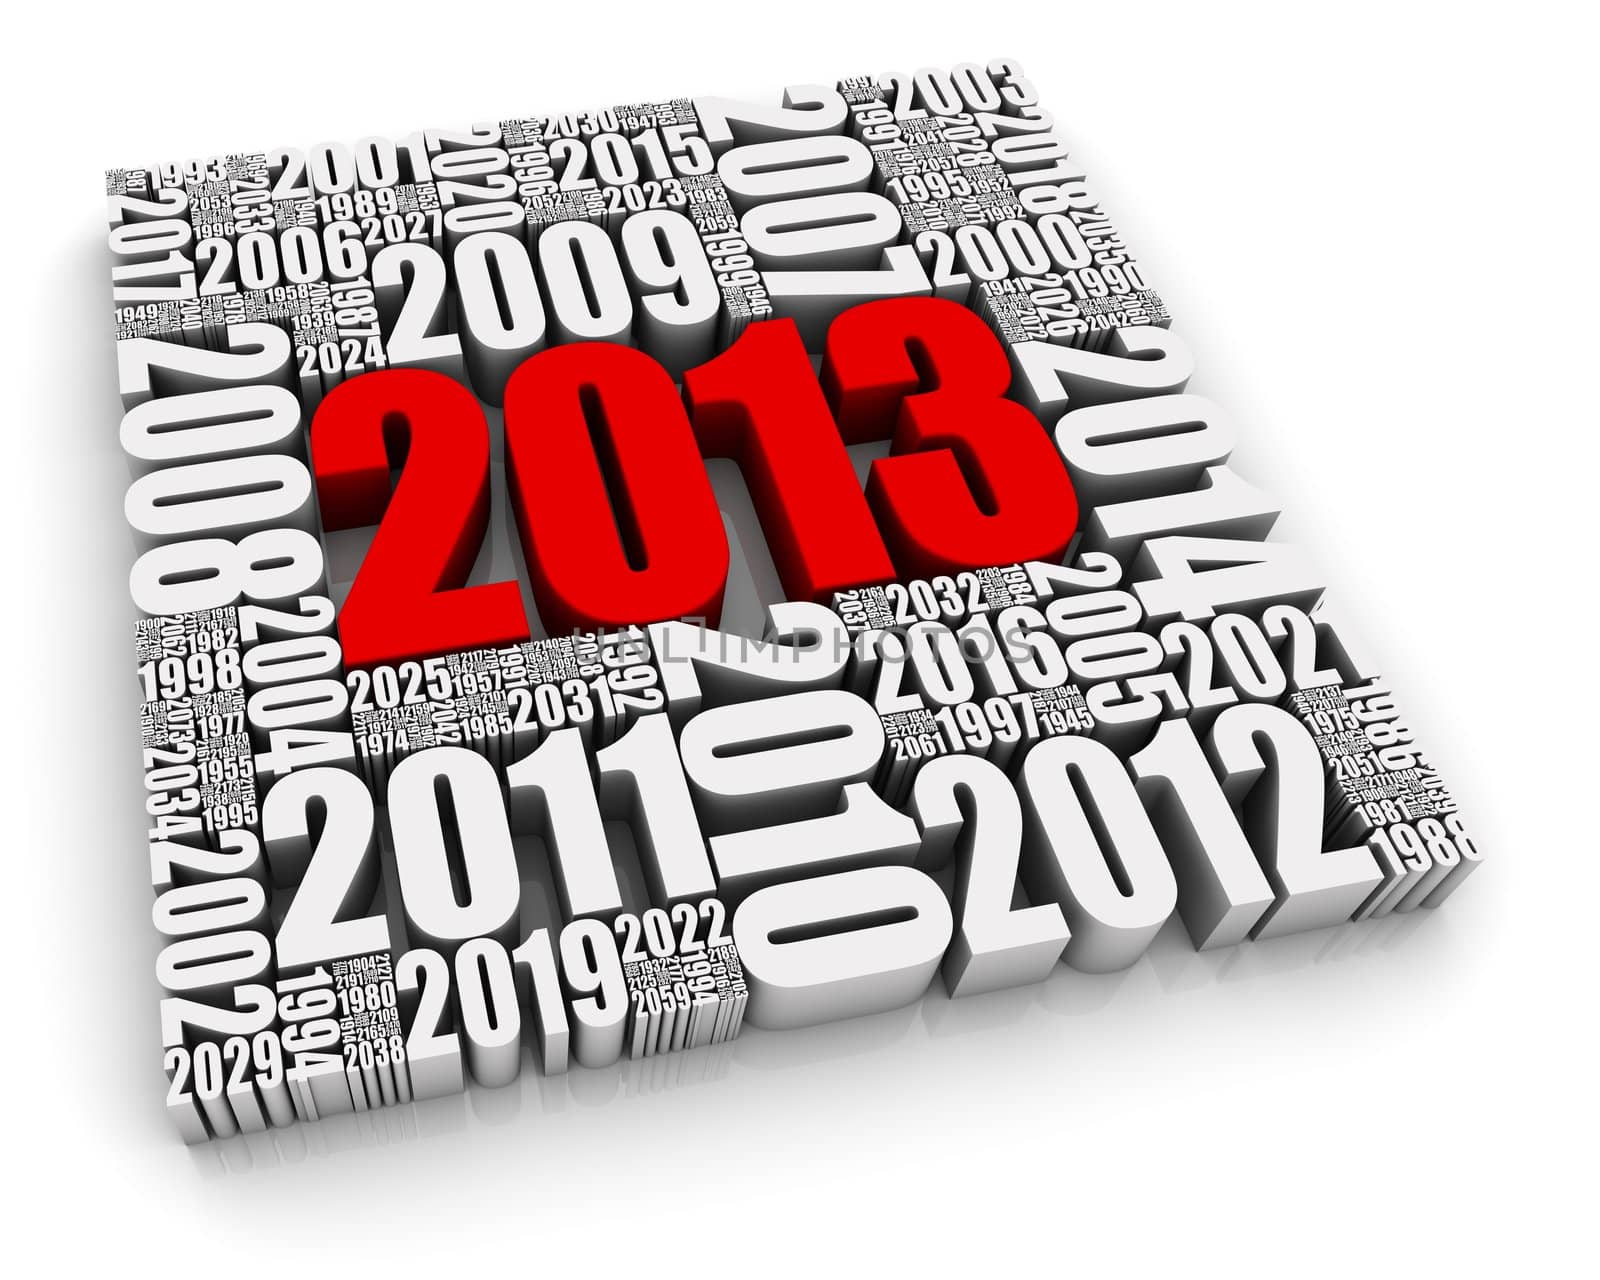 Year 2013 red 3D text surrounded by other dates. Part of a series.